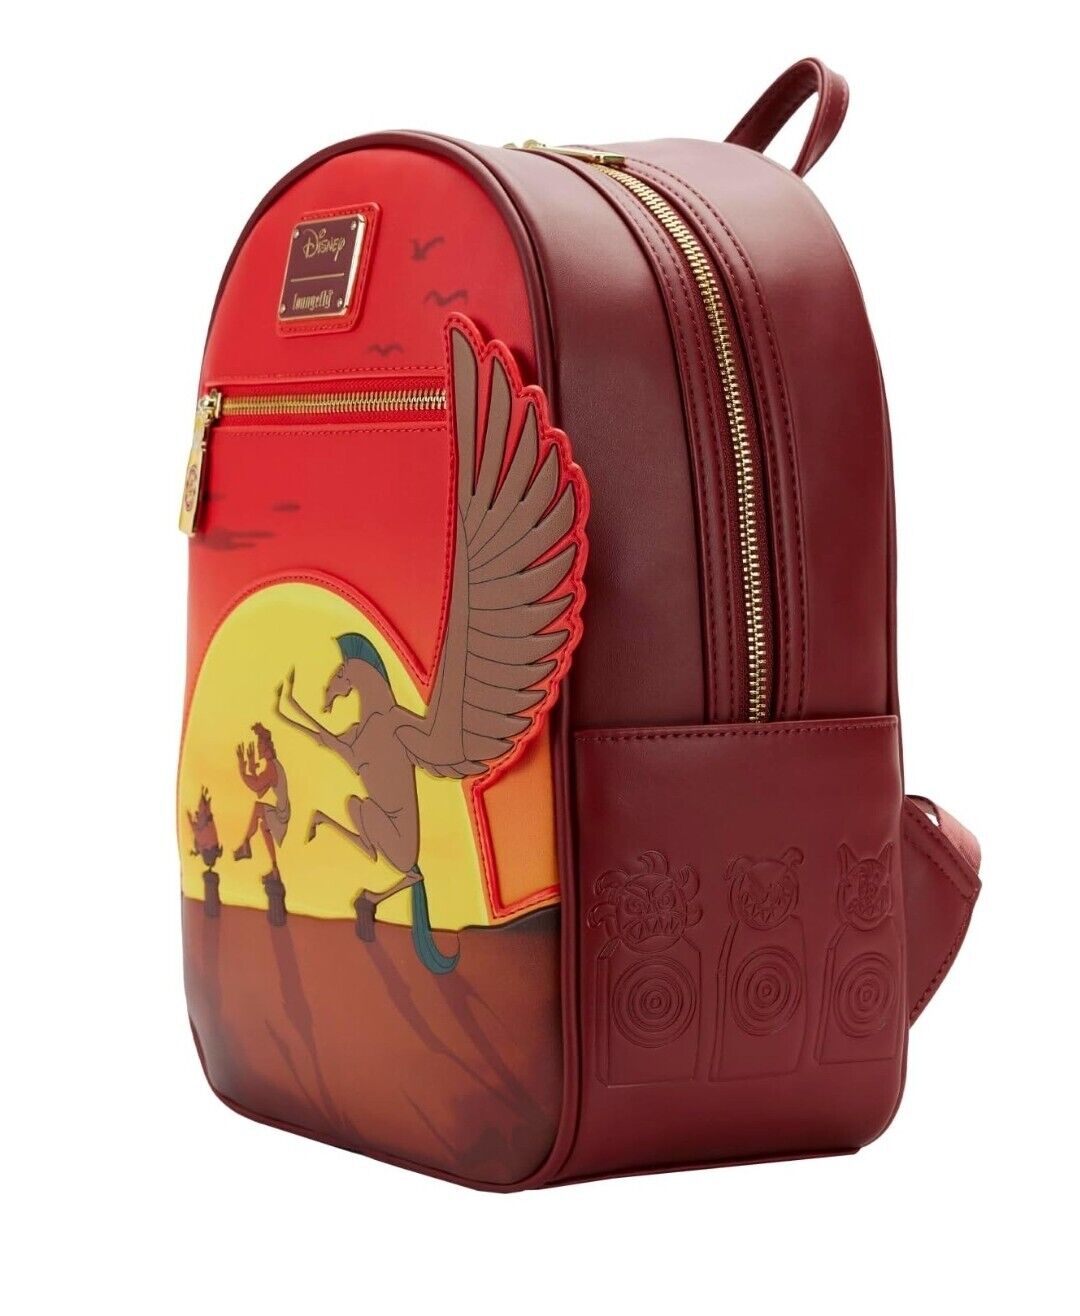 Disney Loungefly Hercules 25th Anniversary Sunset Mini Backpack NWT New w/Tags